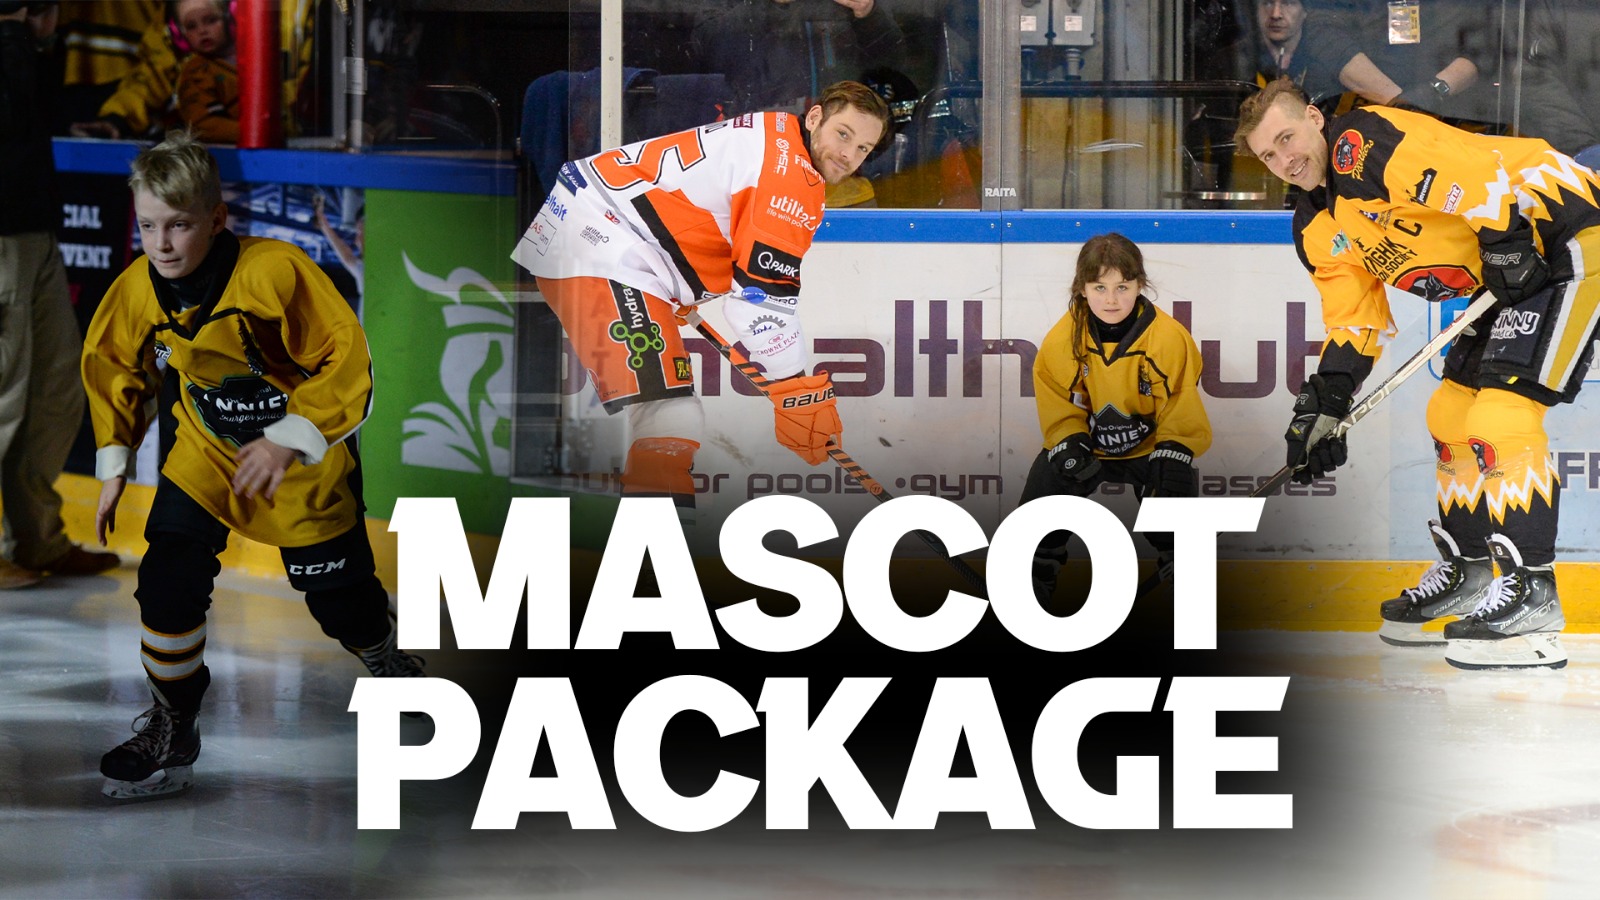 Mascot Package